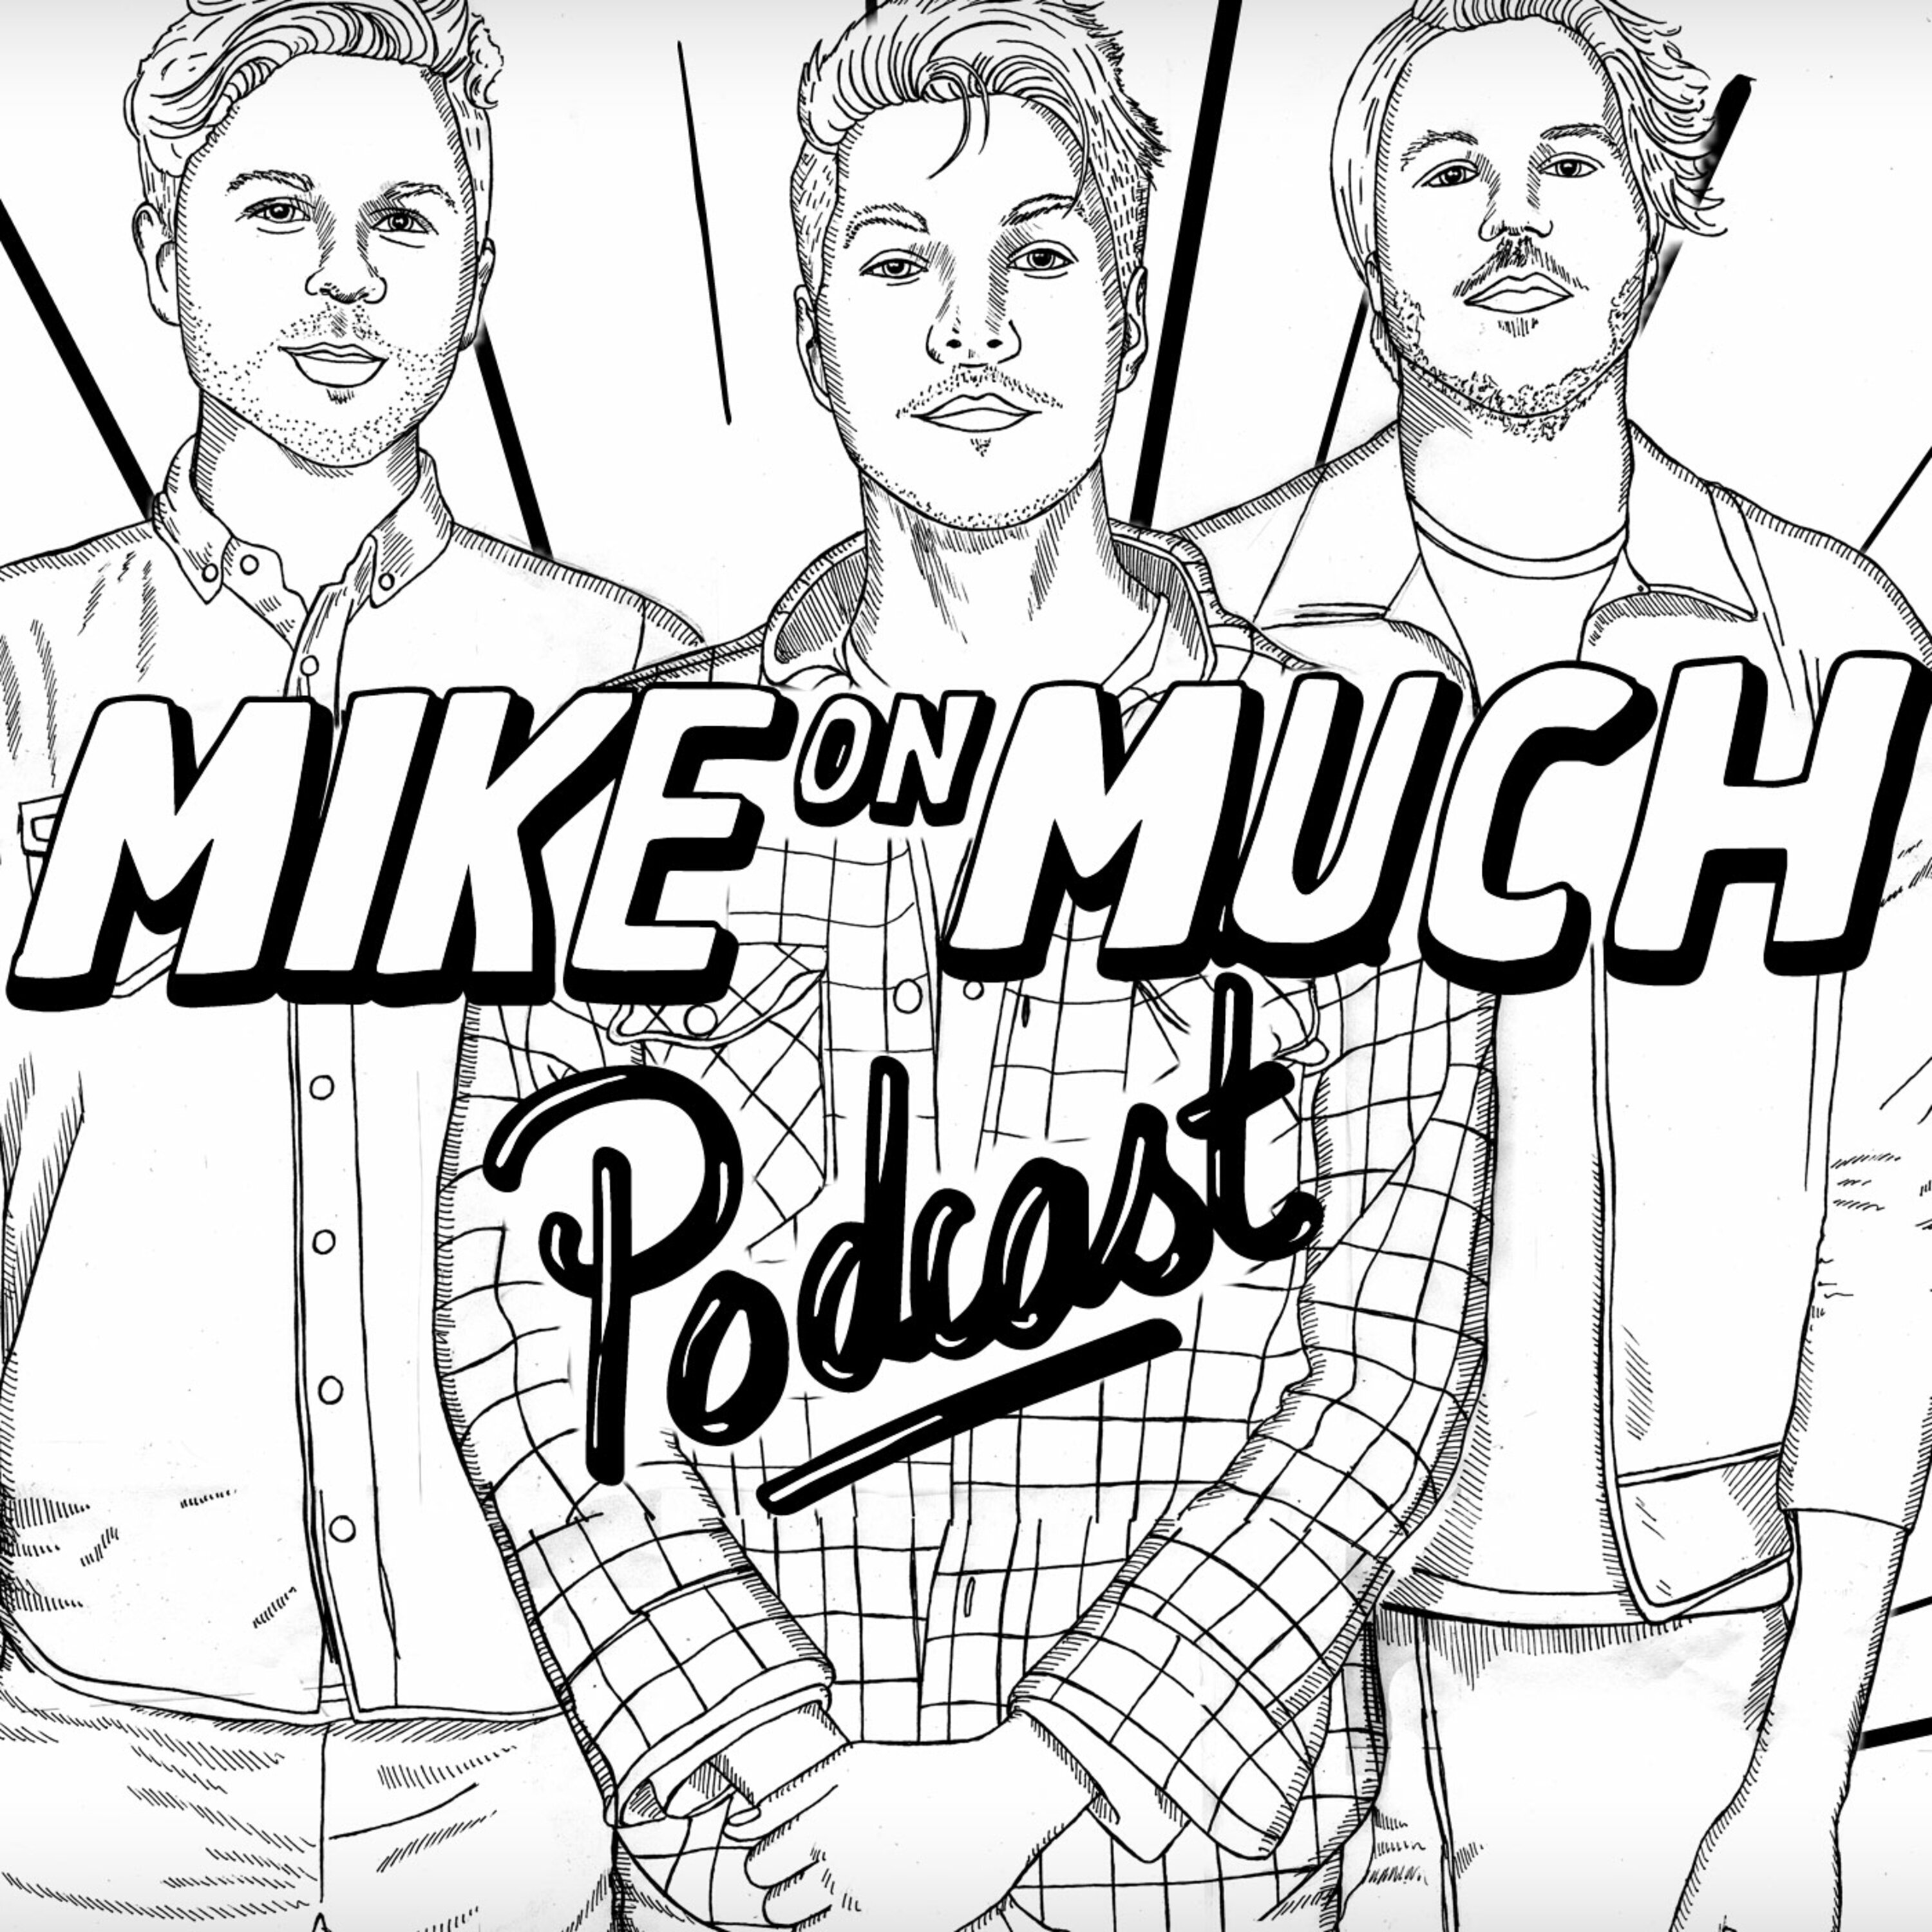 Season 1 Mike On Much: “Celebrities Have A Lot More Time On Their Hands”